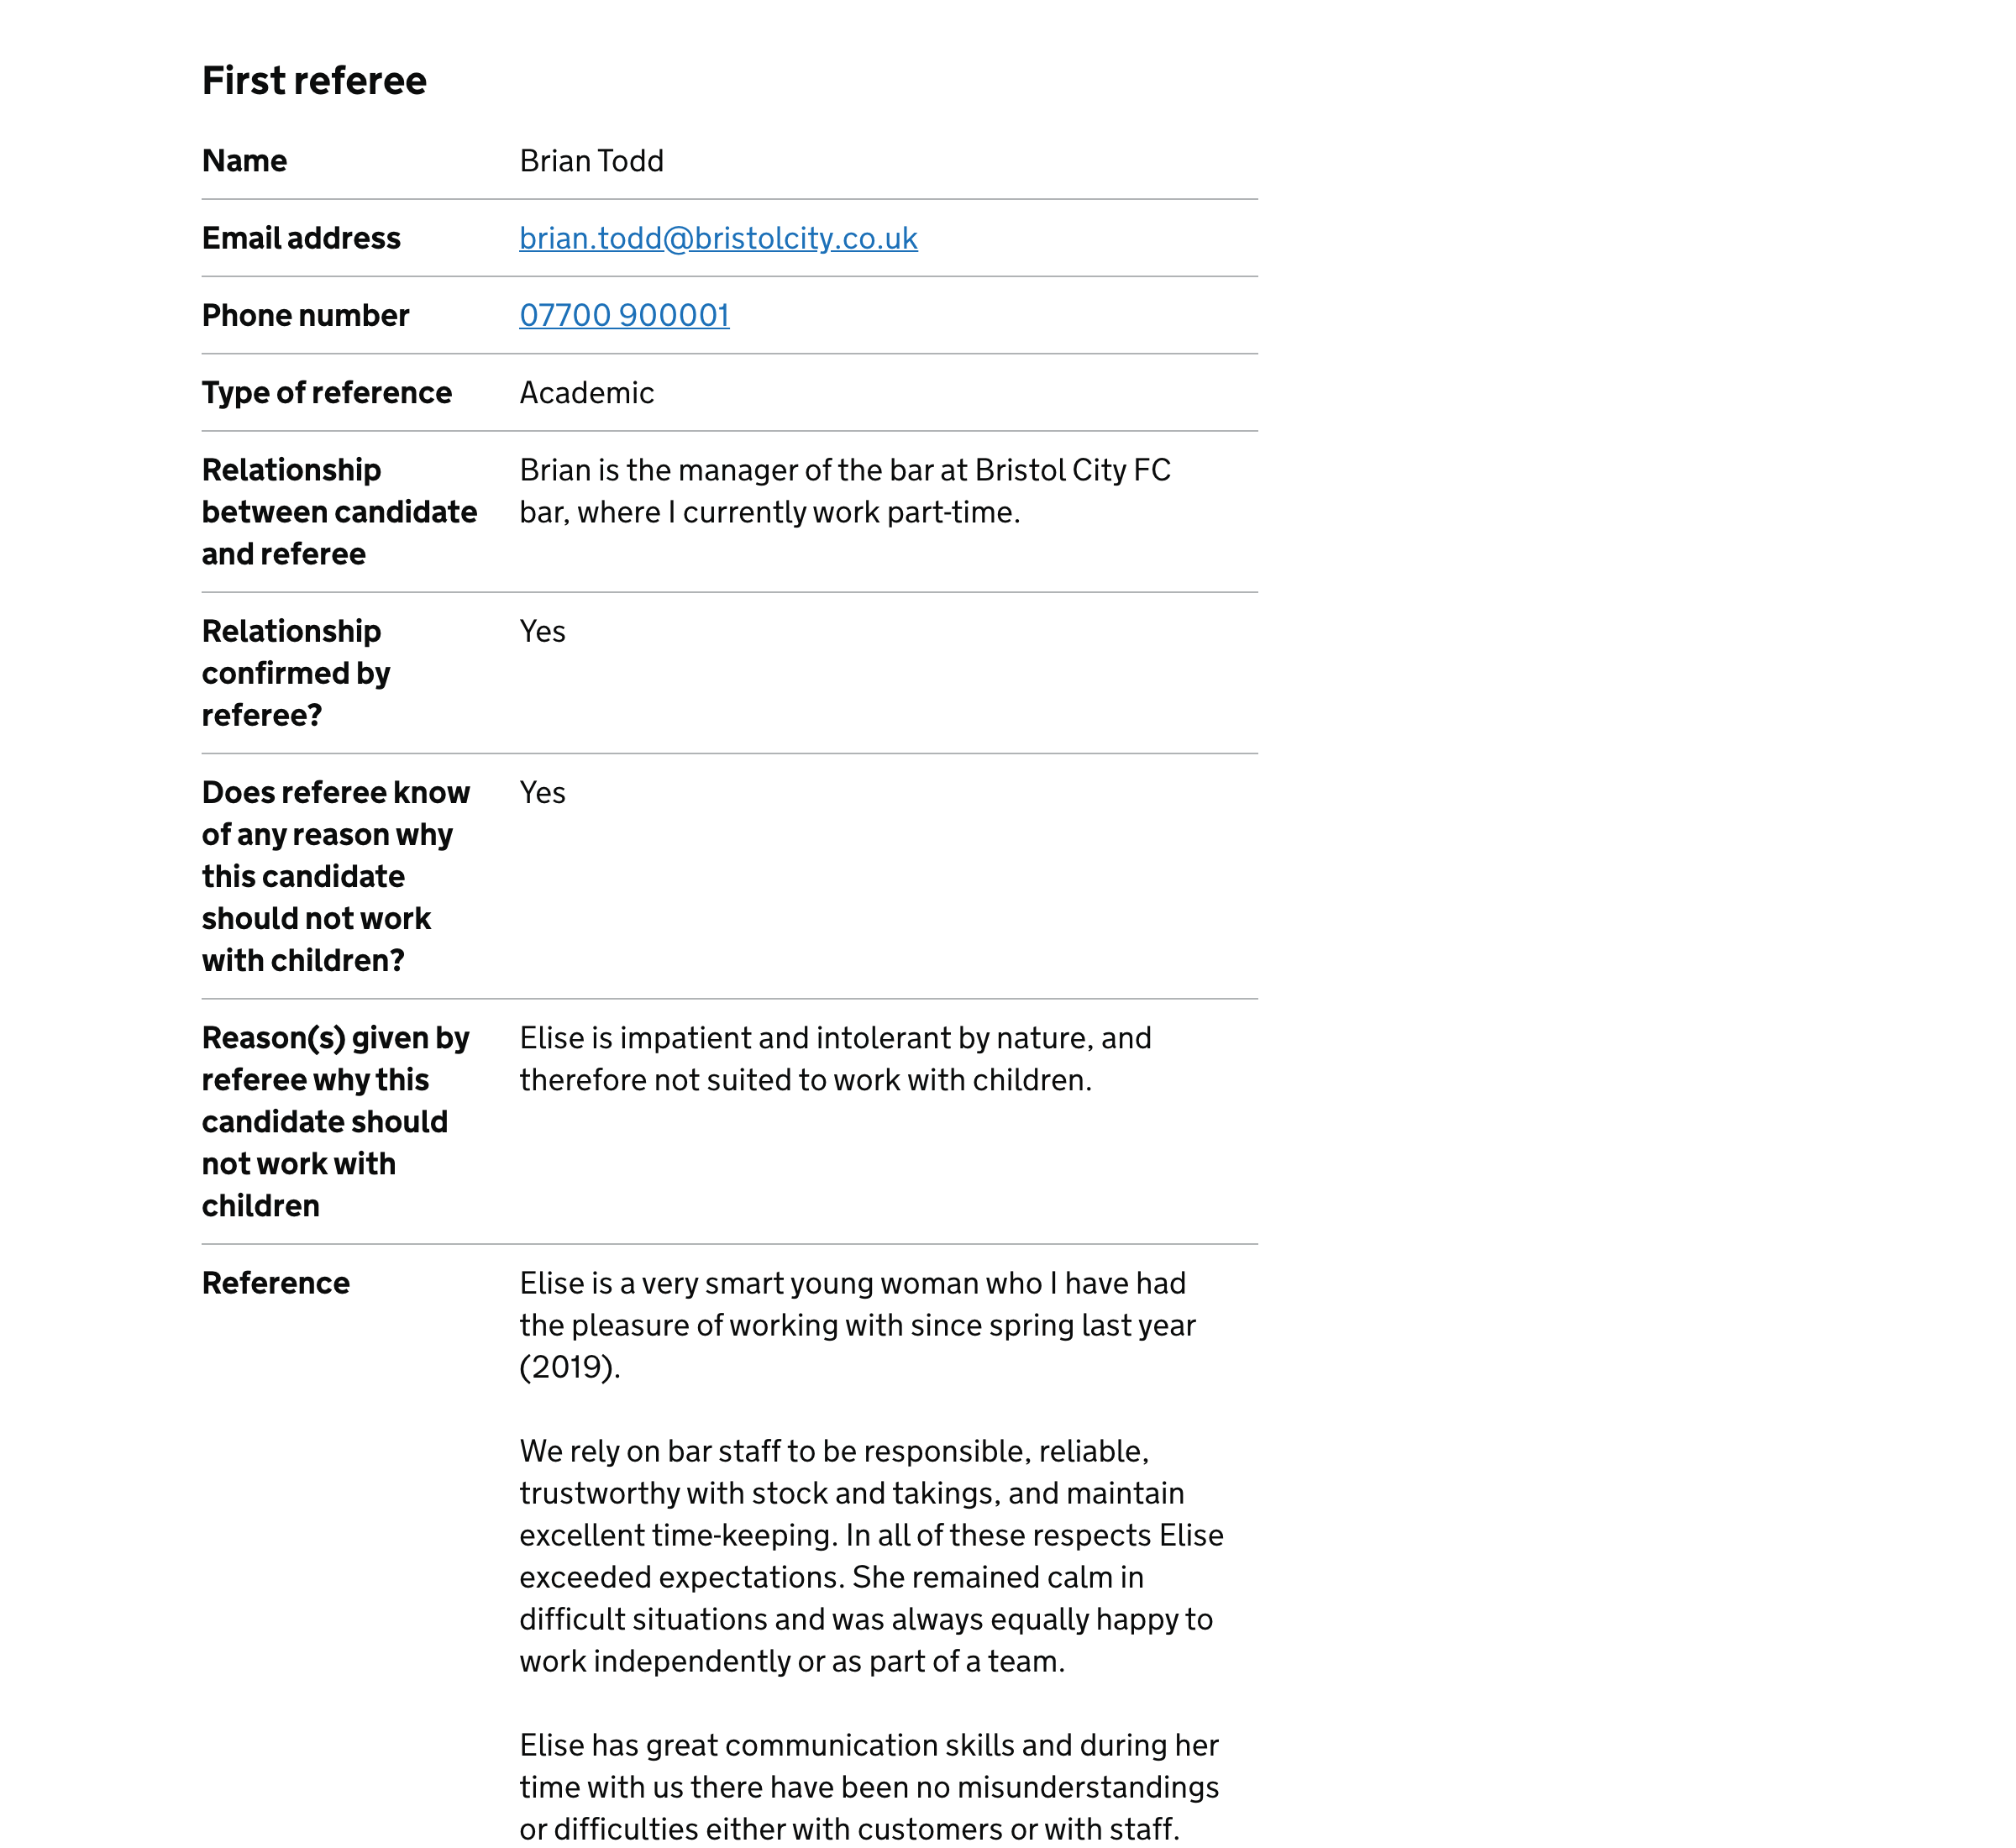 Screenshot of ‘First referee’ section of application form.